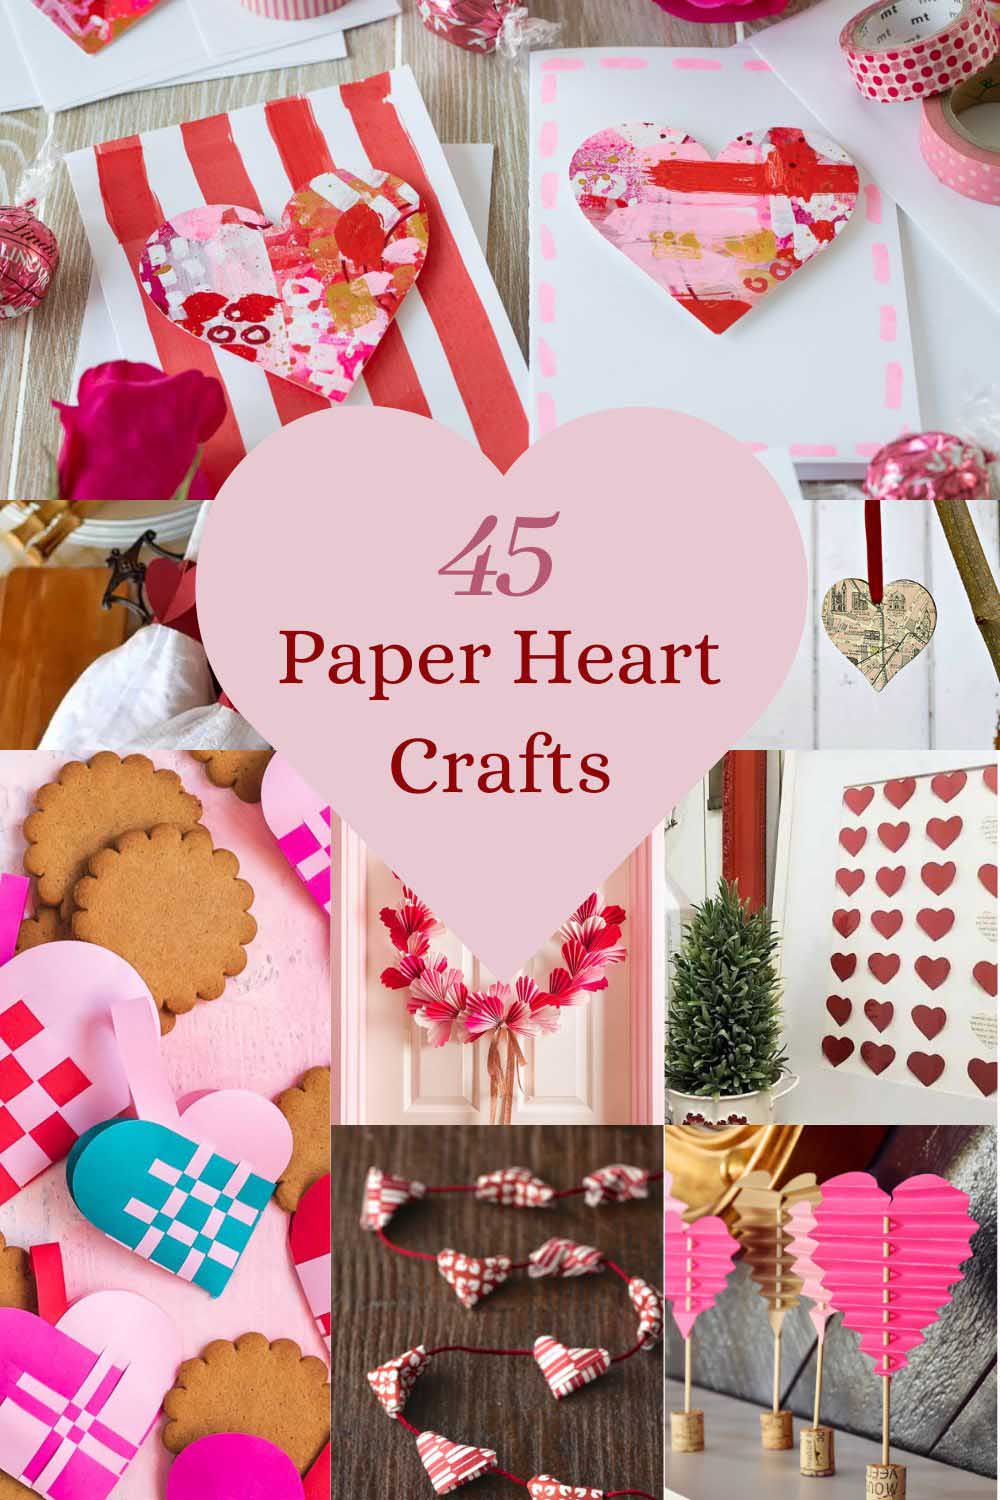 45 paper heart crafts pin